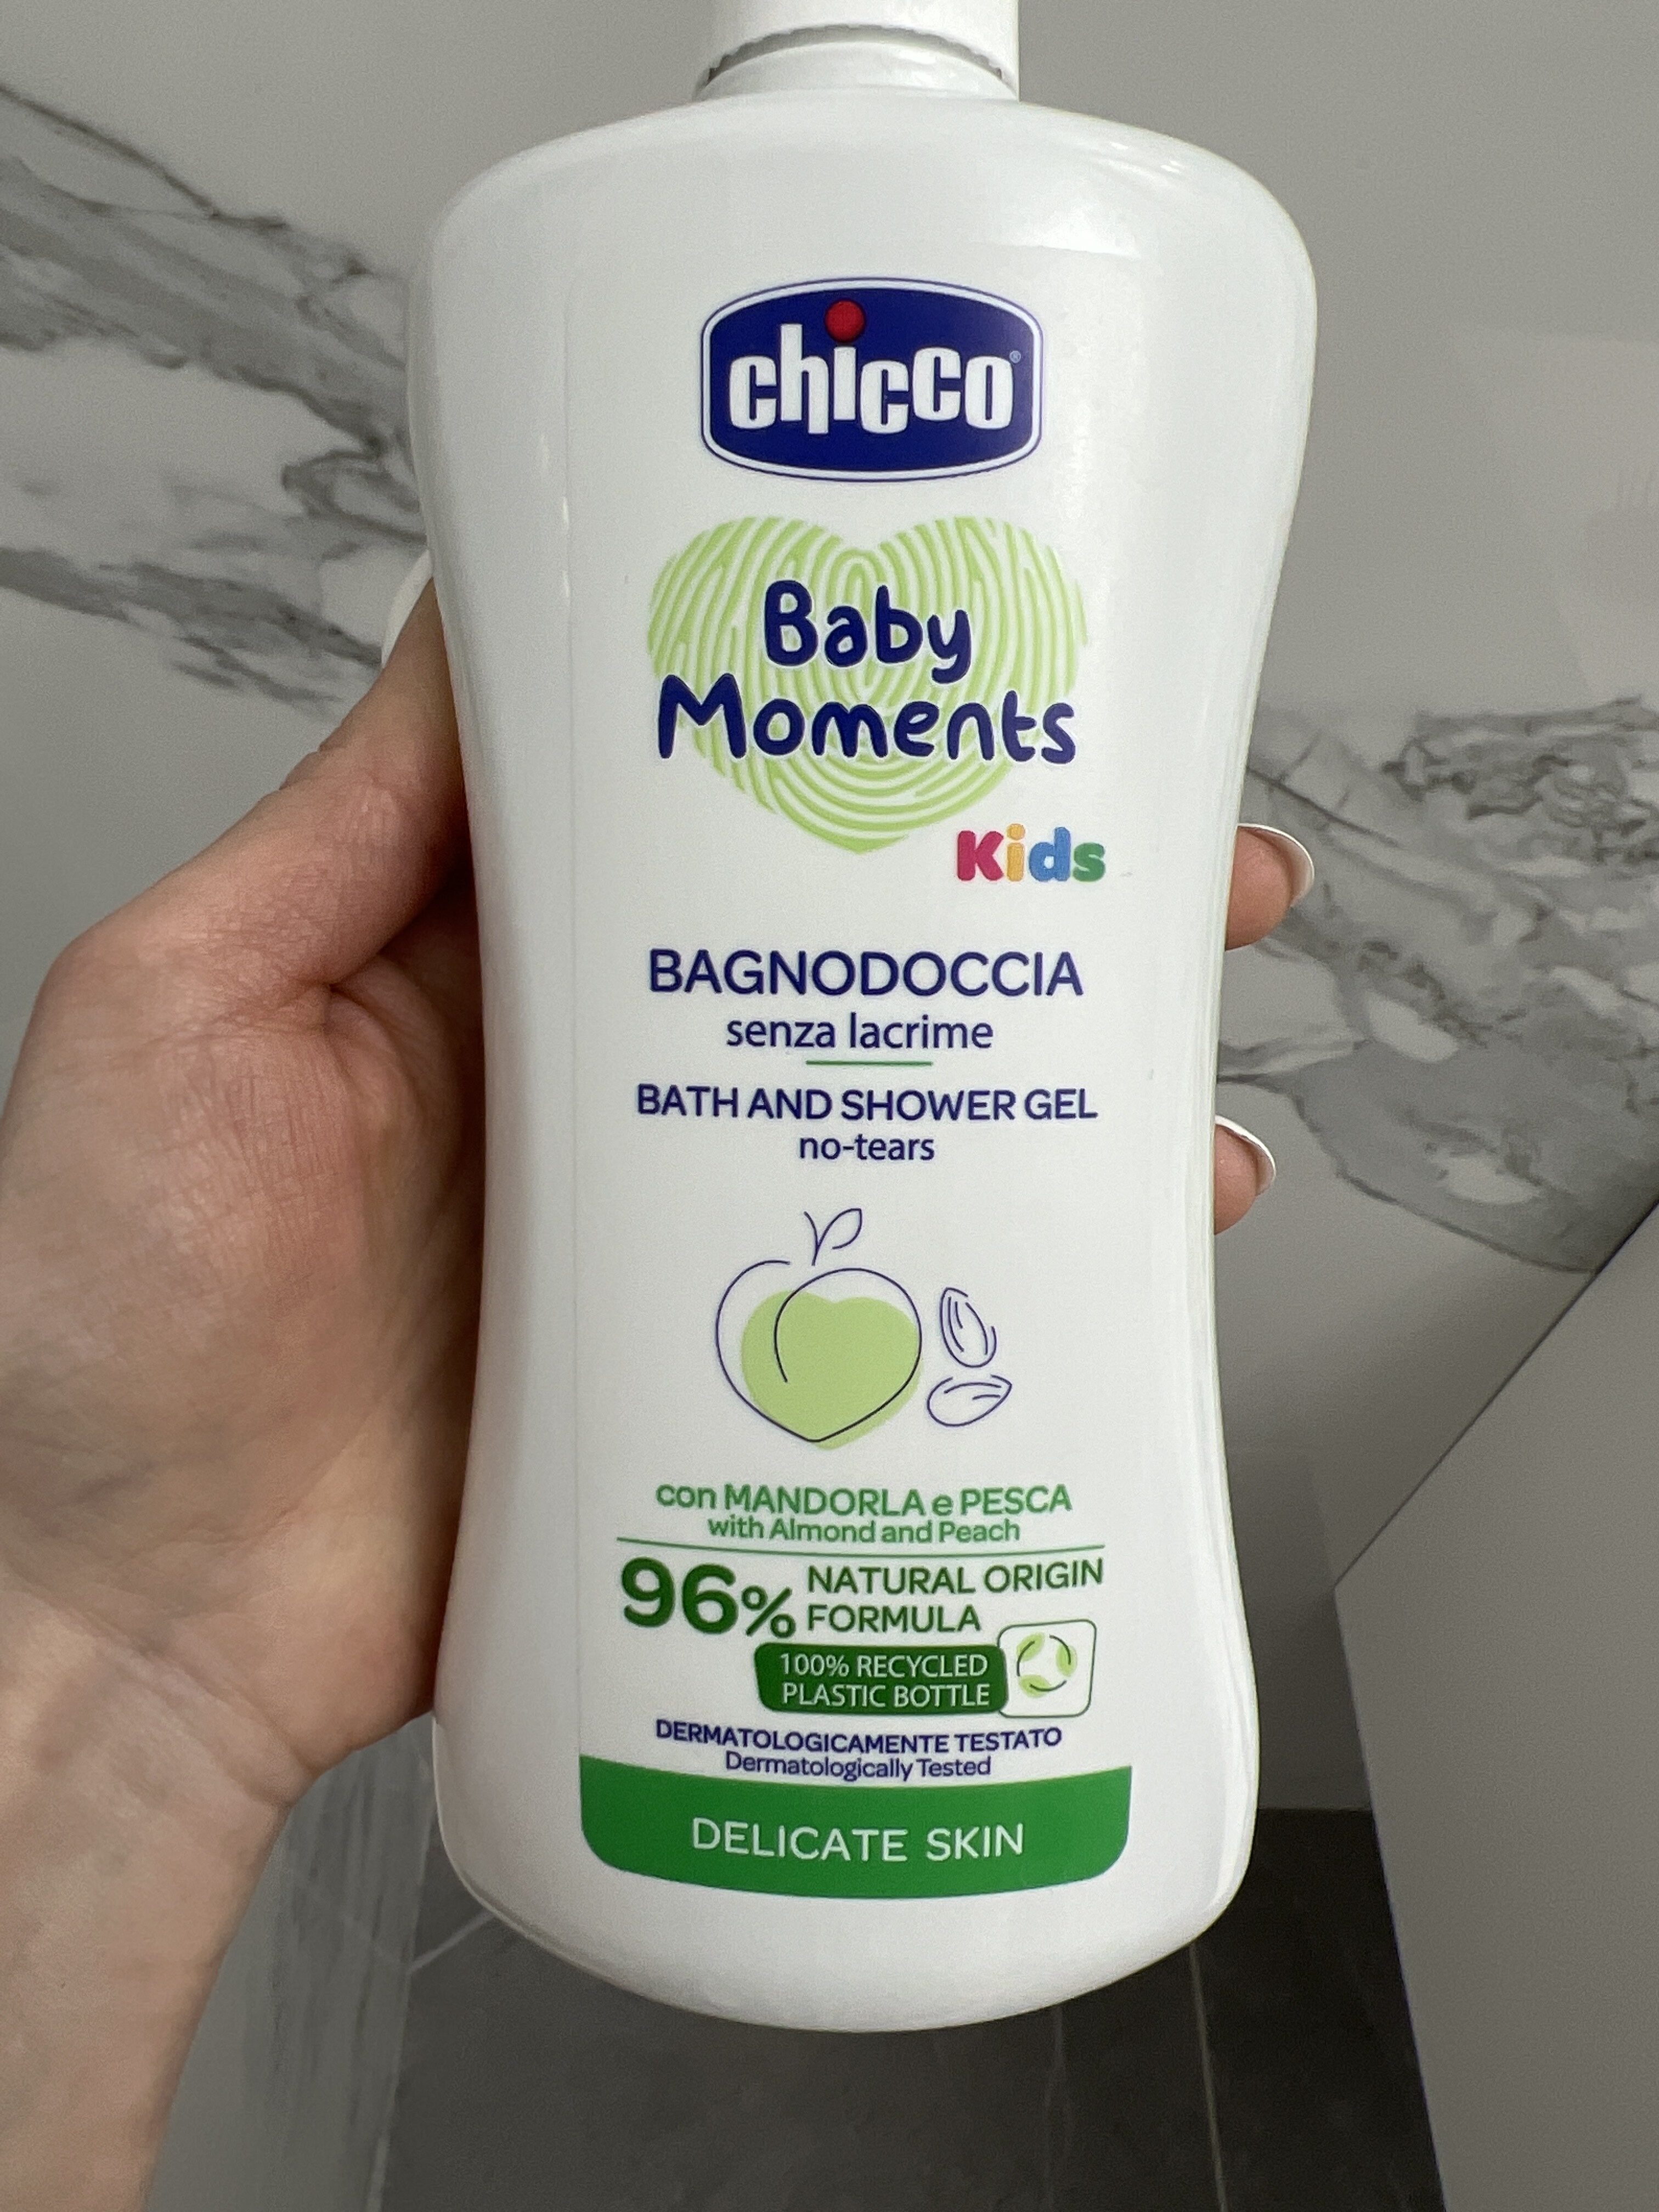 Bath and shower gel Baby Moments Kids - Product - ru